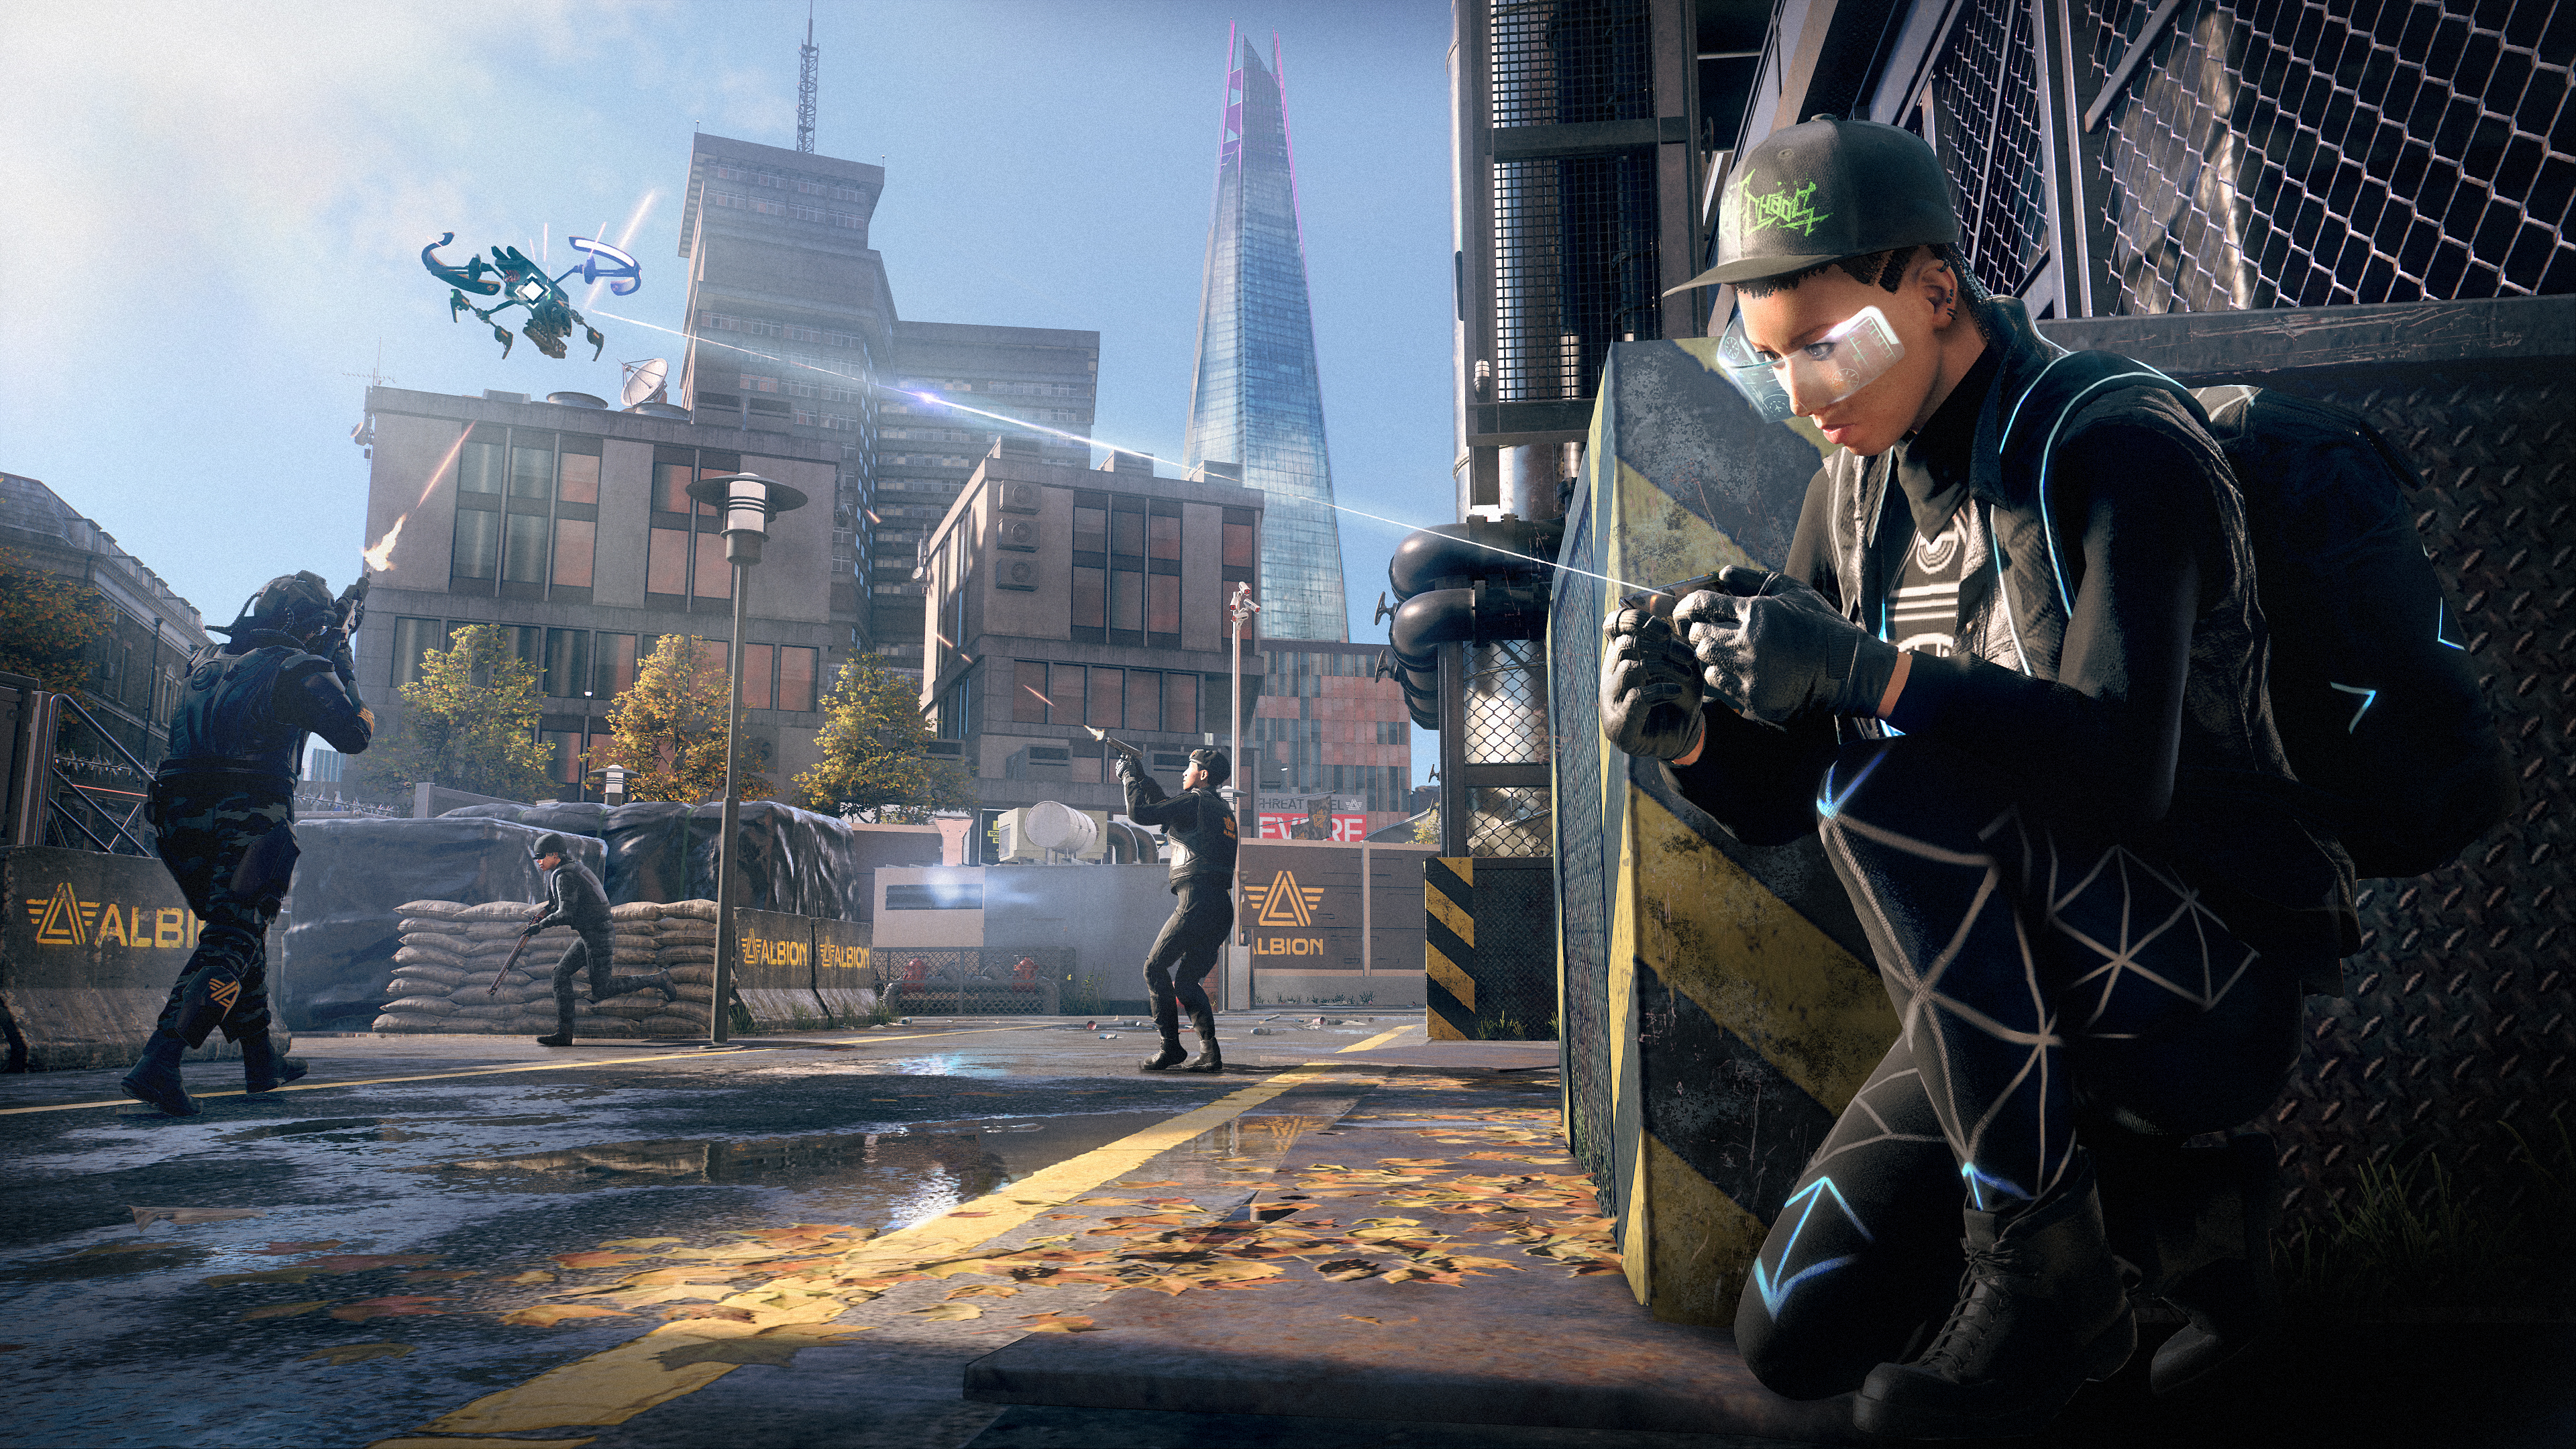 Watch Dogs: Legion Review - The Final Verdict 